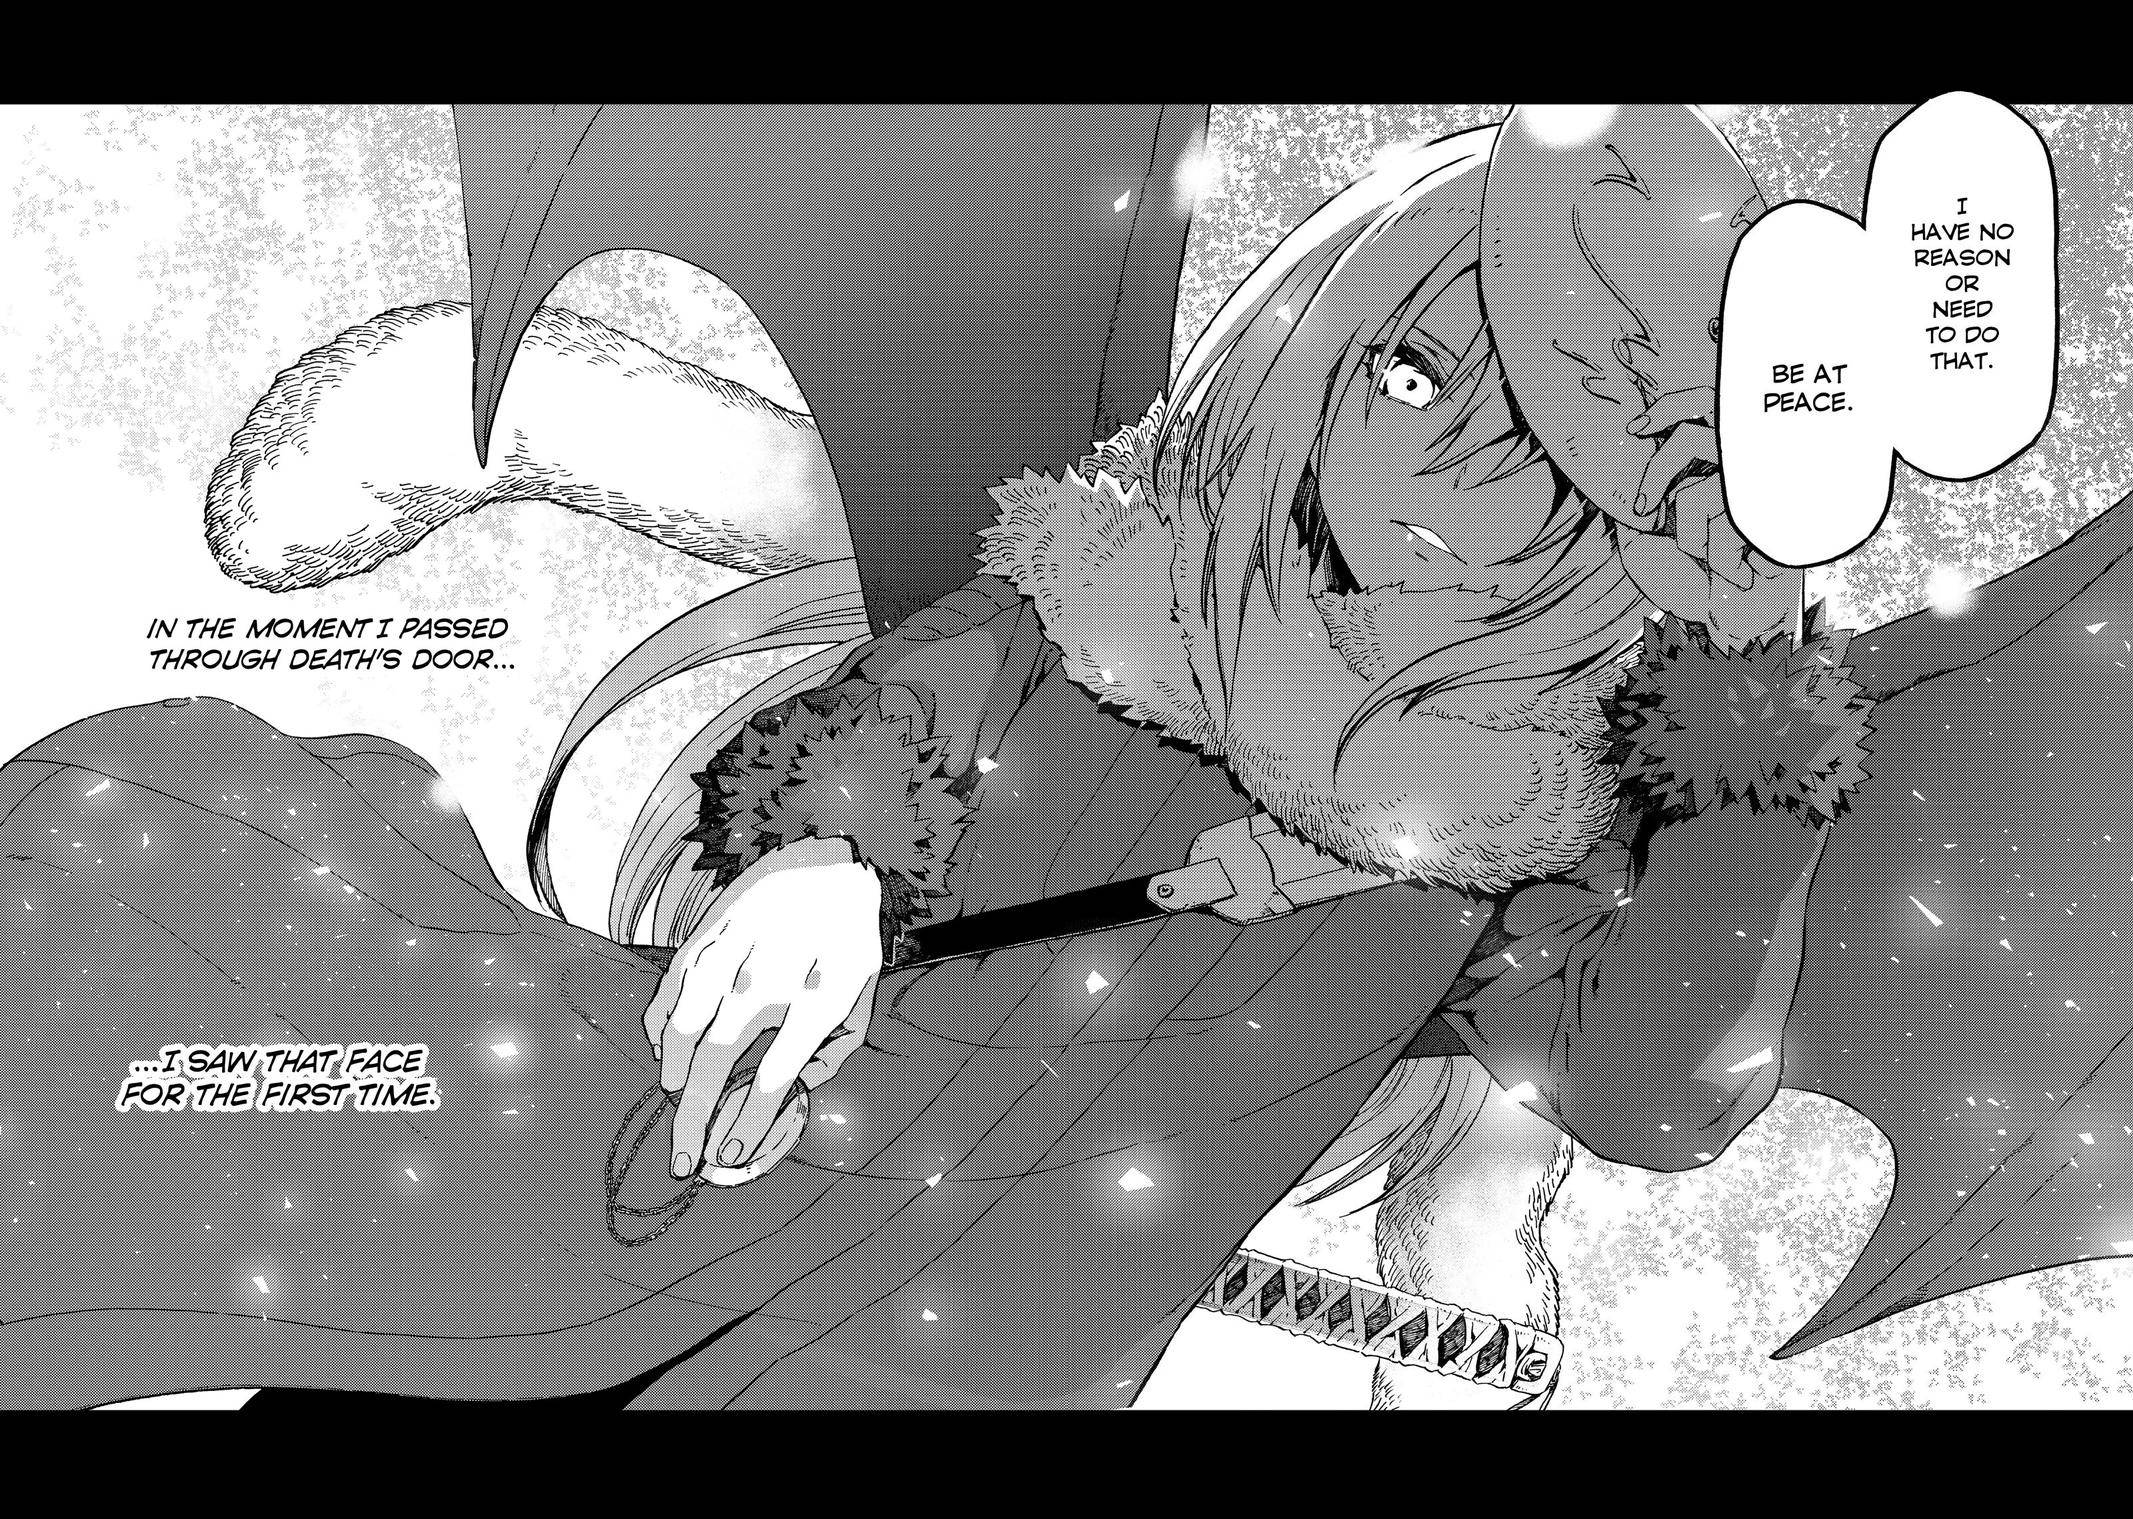 That Time I Got Reincarnated as a Slime, Chapter 70.5